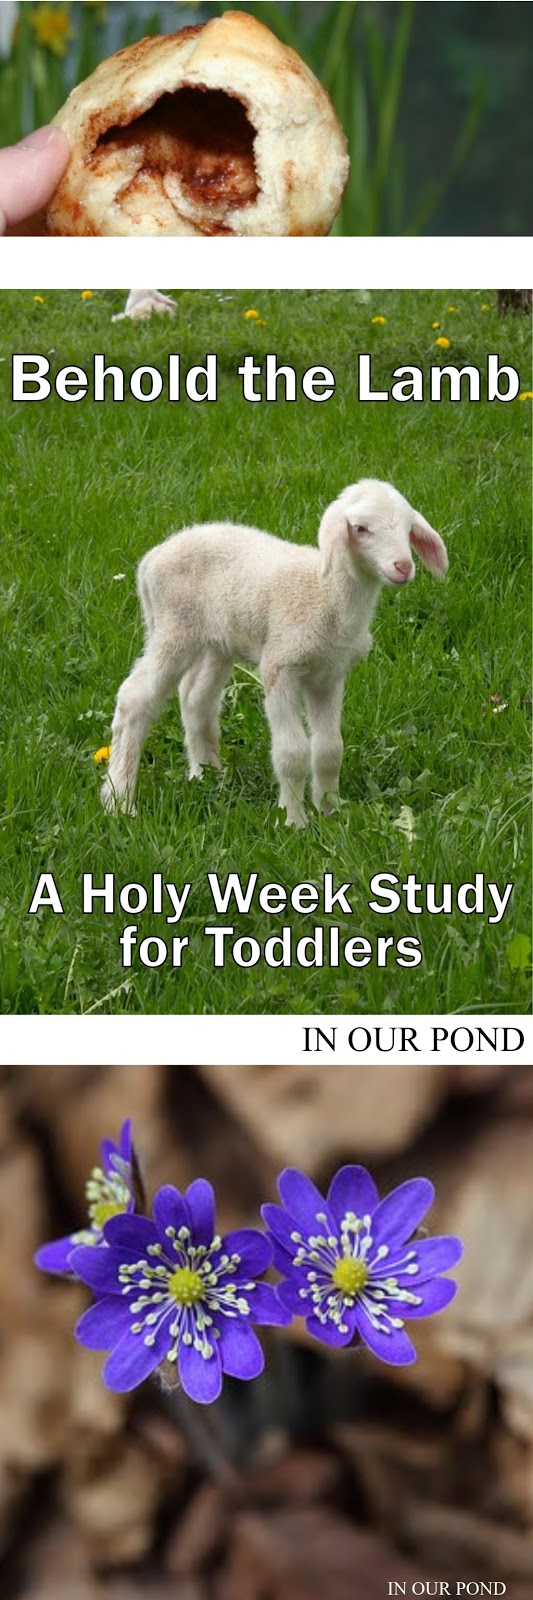 Behold the Lamb- A Holy Week Study for Toddlers from In Our Pond